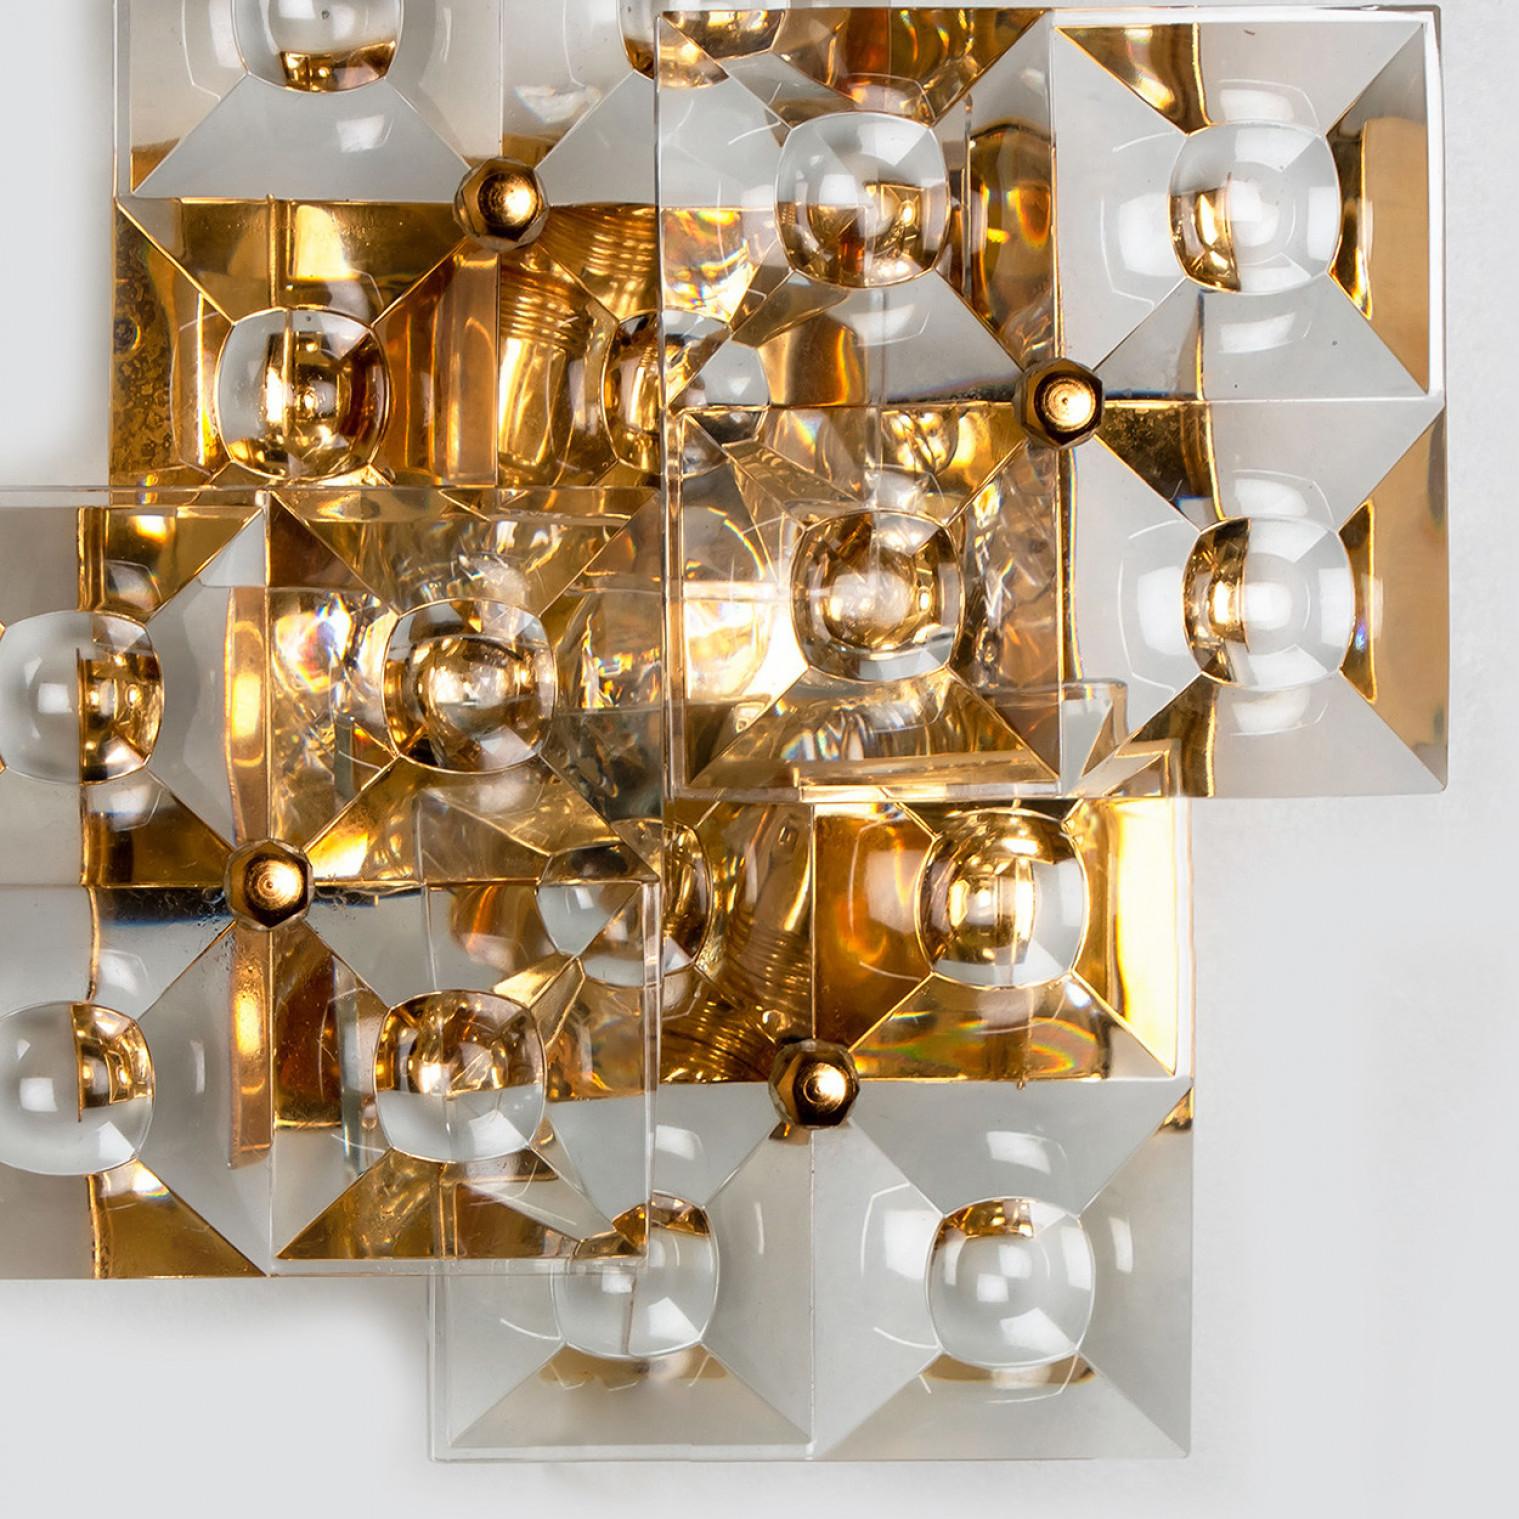 Pair of Crystal Gold-Plated Wall Sconces by Kinkeldey, Germany, 1970s For Sale 3